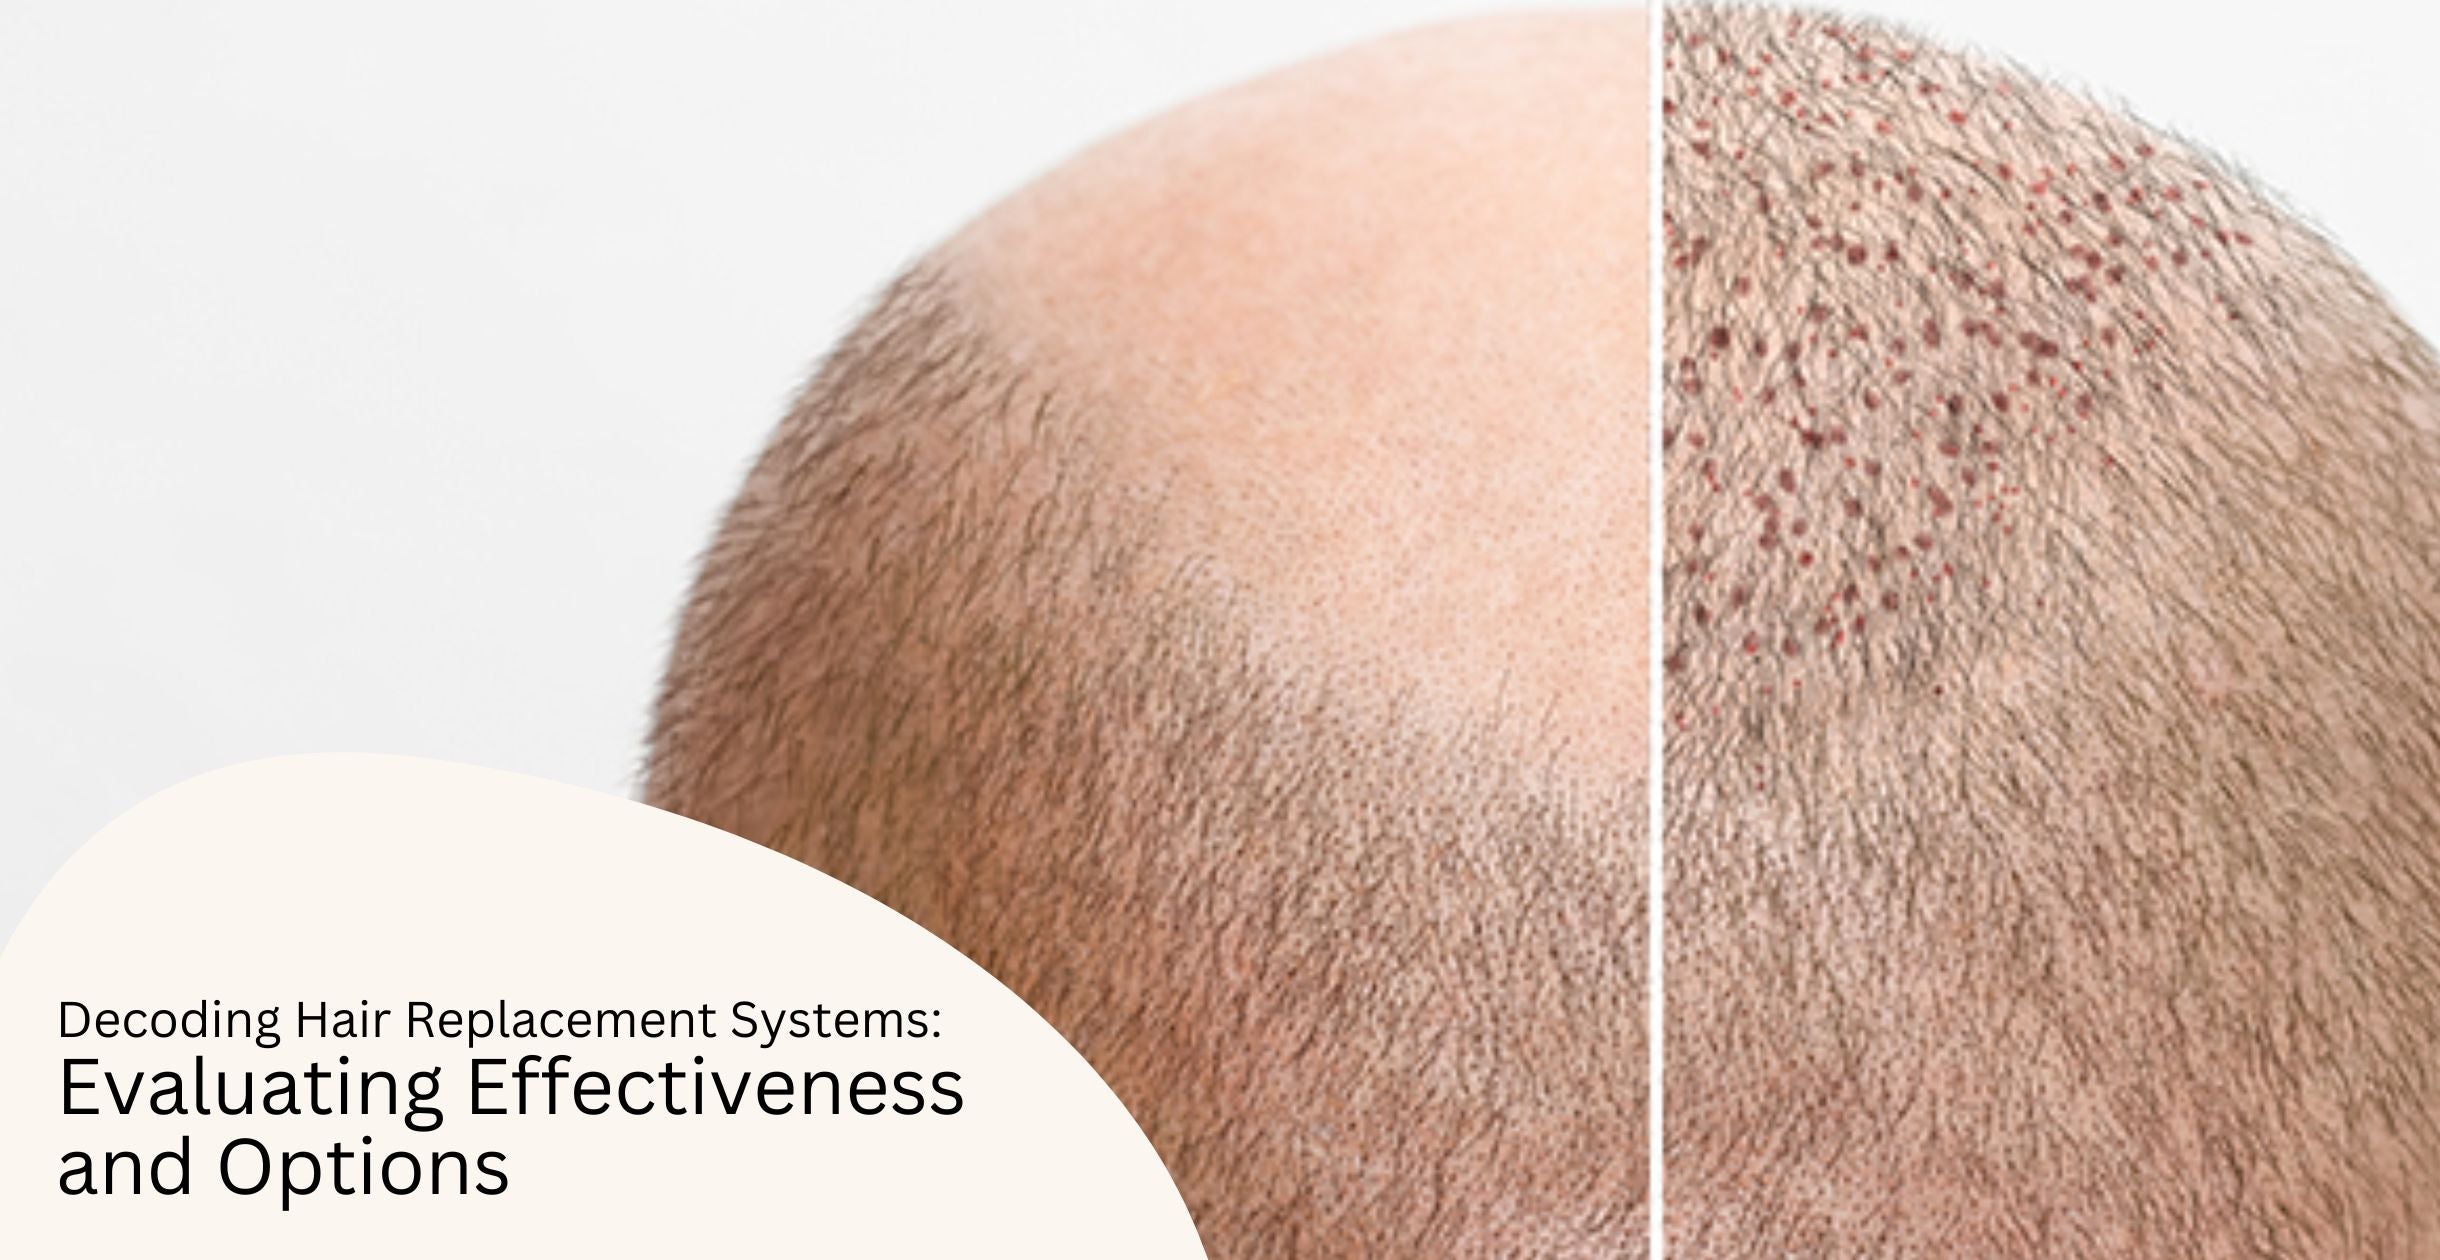 Decoding Hair Replacement Systems: Evaluating Effectiveness and Options